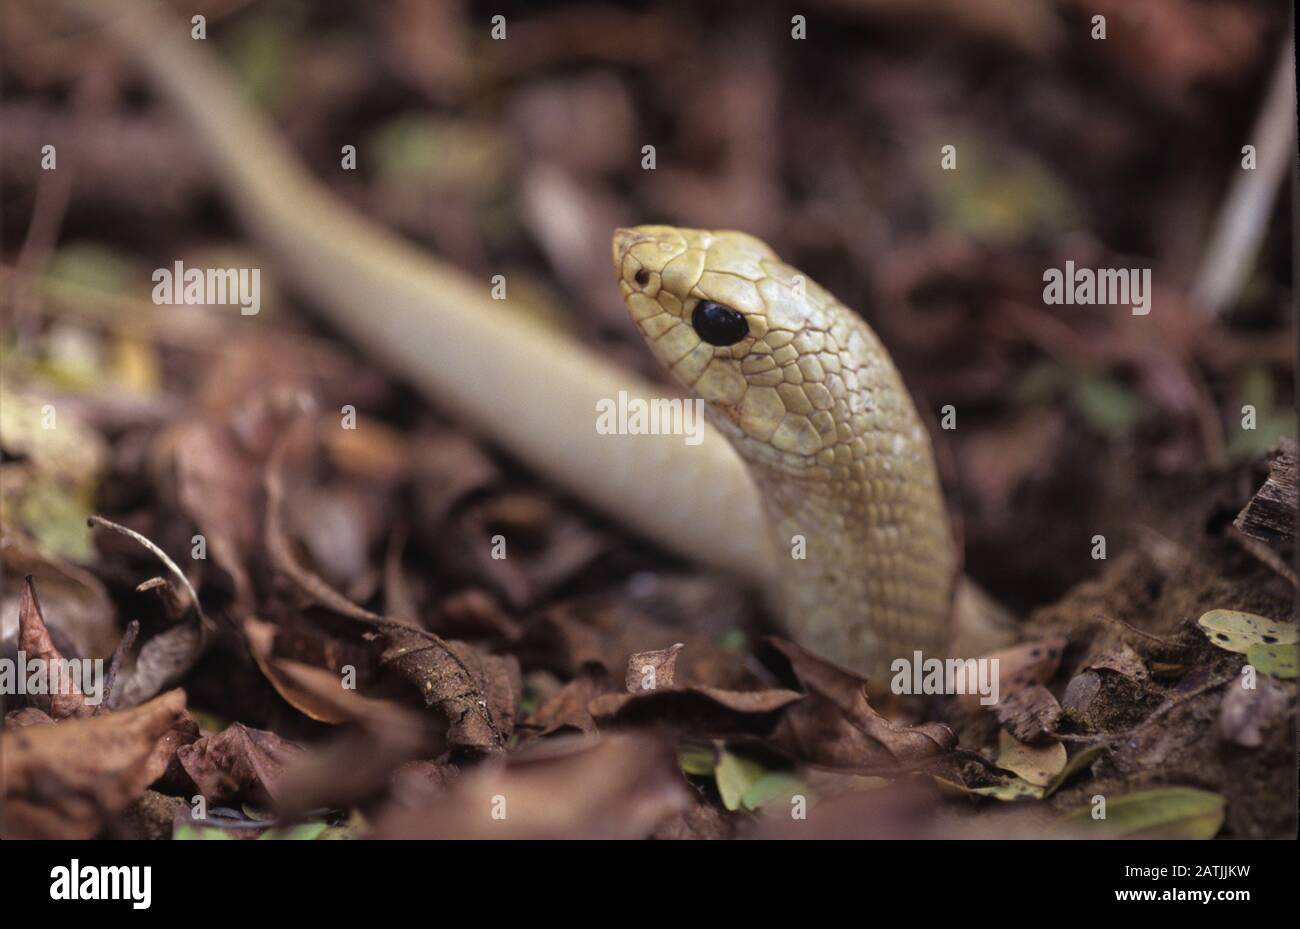 Endemic Species of White Snake, Liophidium species, Poking Head out of Snake Hole Madagascar Stock Photo